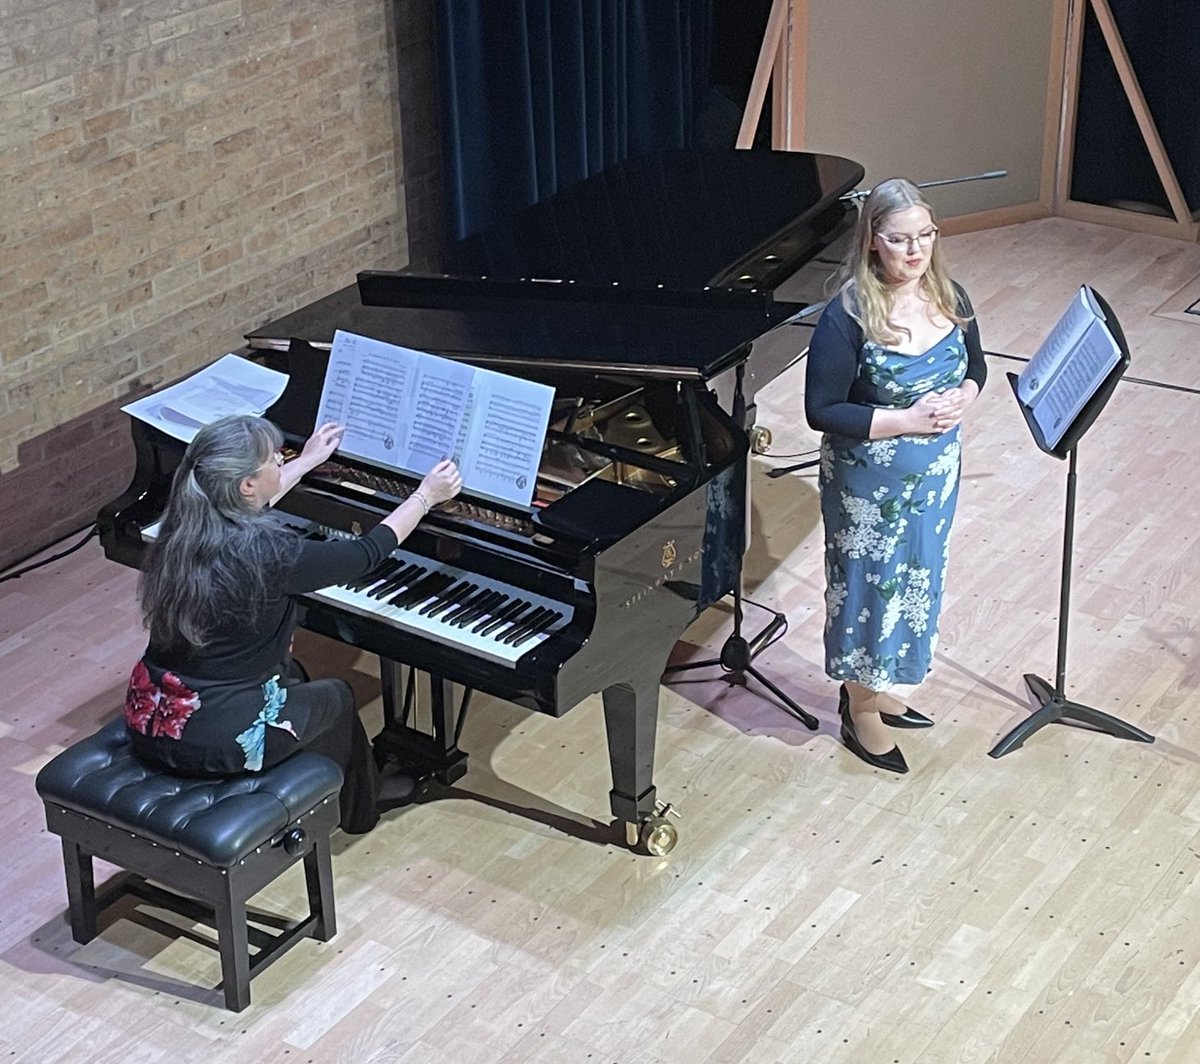 Thoroughly enjoying our lunchtime concert @OxfordJdP with #CharlottePawley, soprano & #ZoëSmith, piano, both cherished alumnae ⁦@hilda_beastoxf⁩ & now ⁦@RWCMD⁩ performing work by #WomenComposers #GraceWilliams & alumnae/HonoraryFellows/Mother/daughter #MaconchyLeFanu